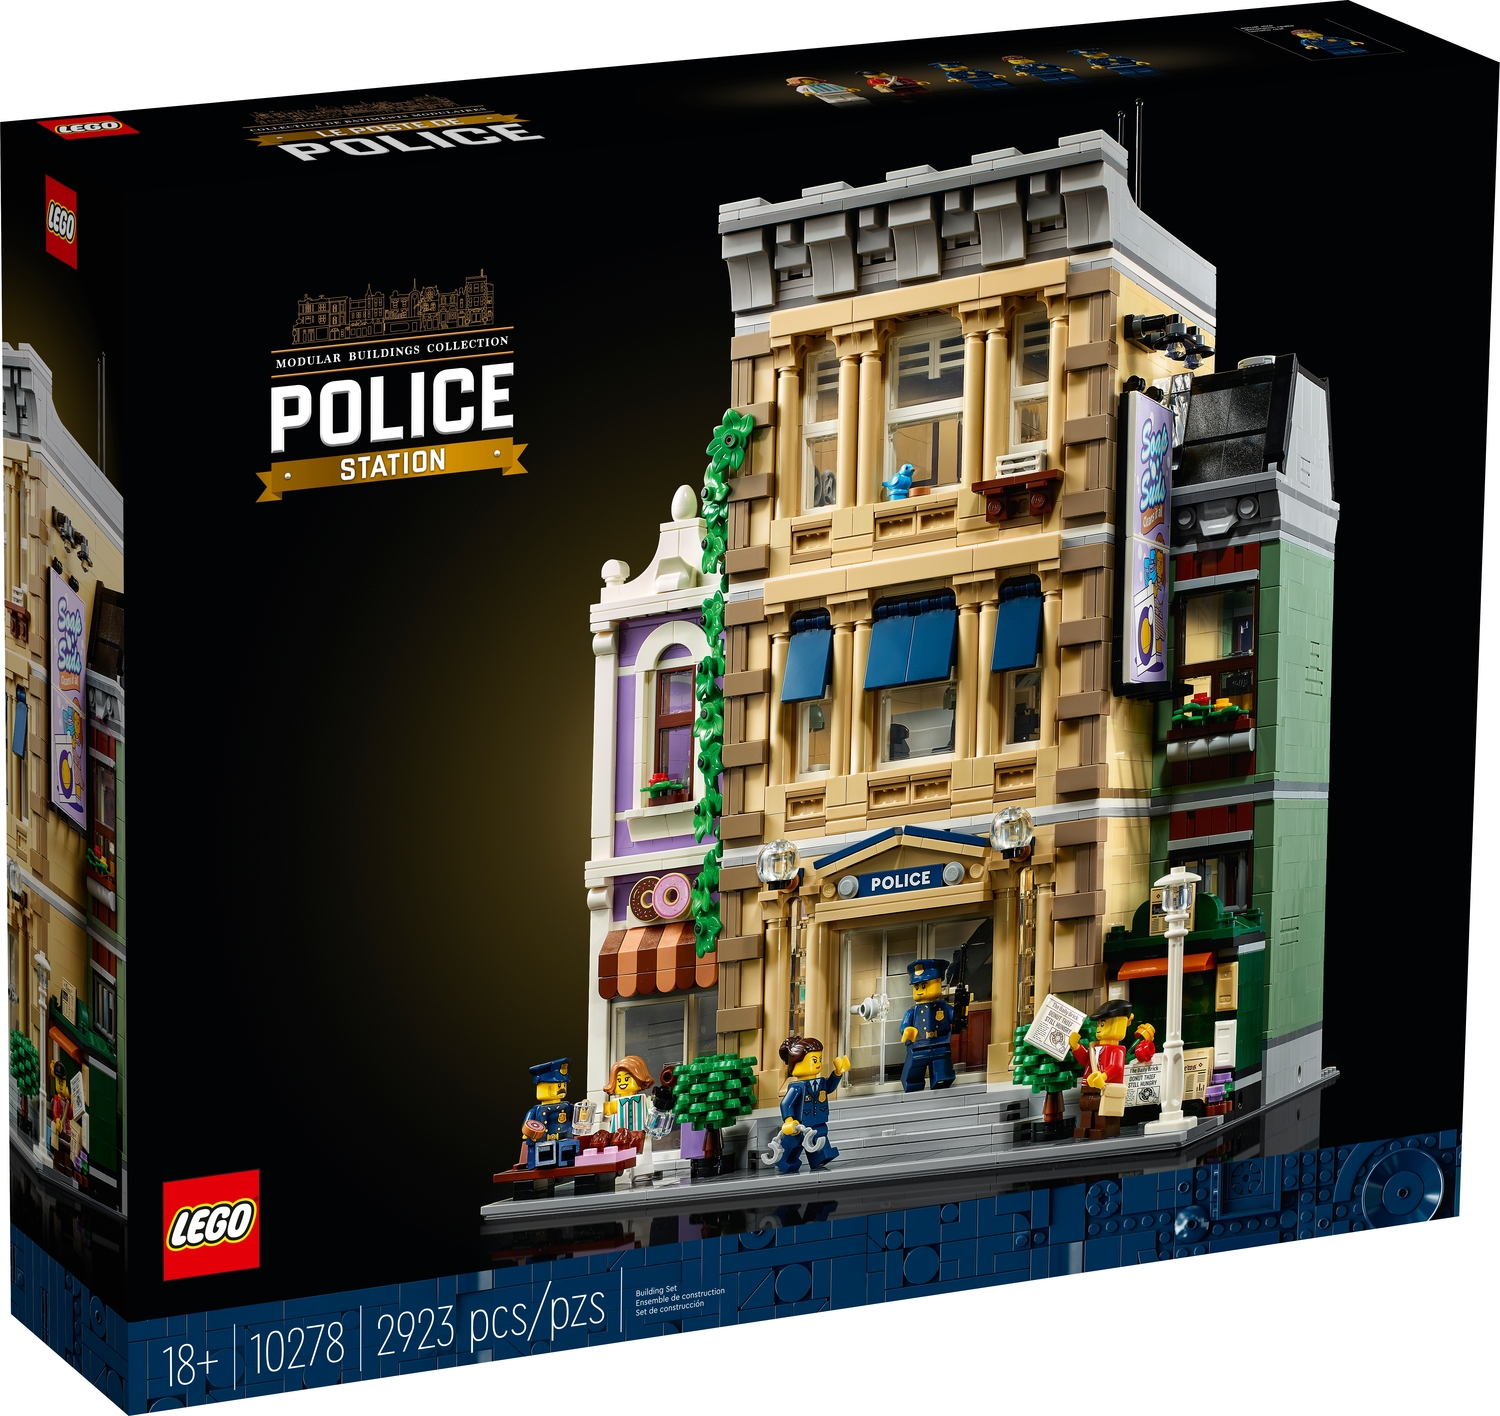 LEGO Creator Expert: Police Station - Imagine That Toys